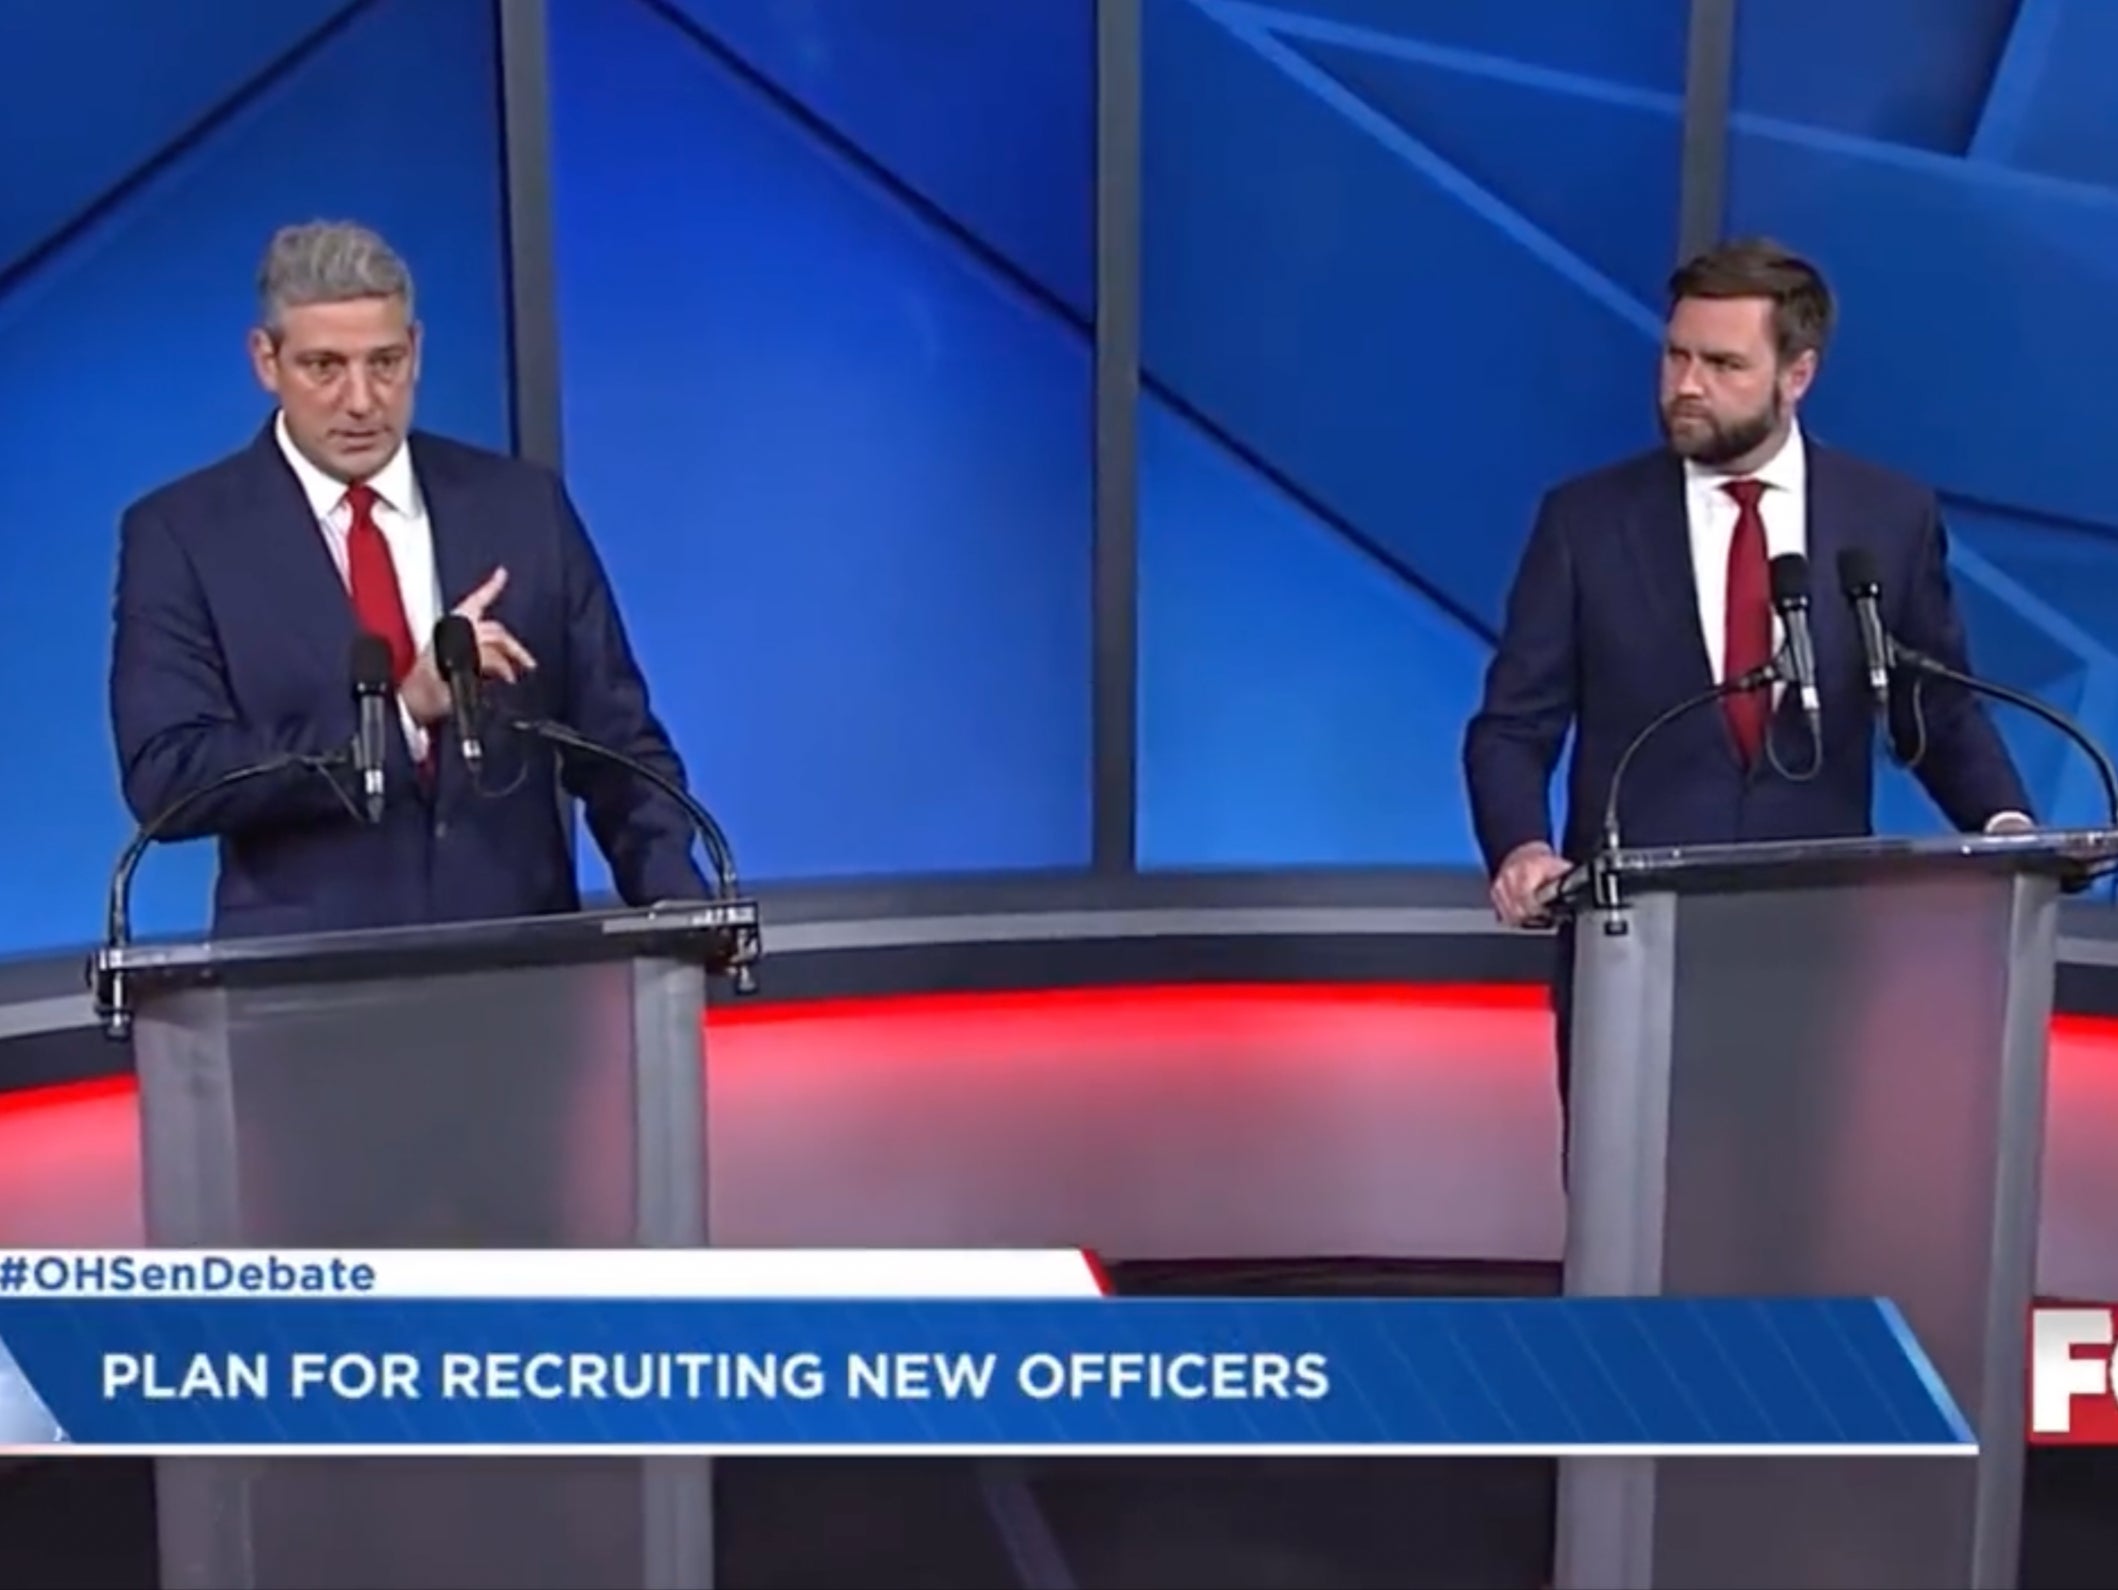 Tim Ryan and JD Vance taking part in debate ahead of election for US Senate seat in Ohio